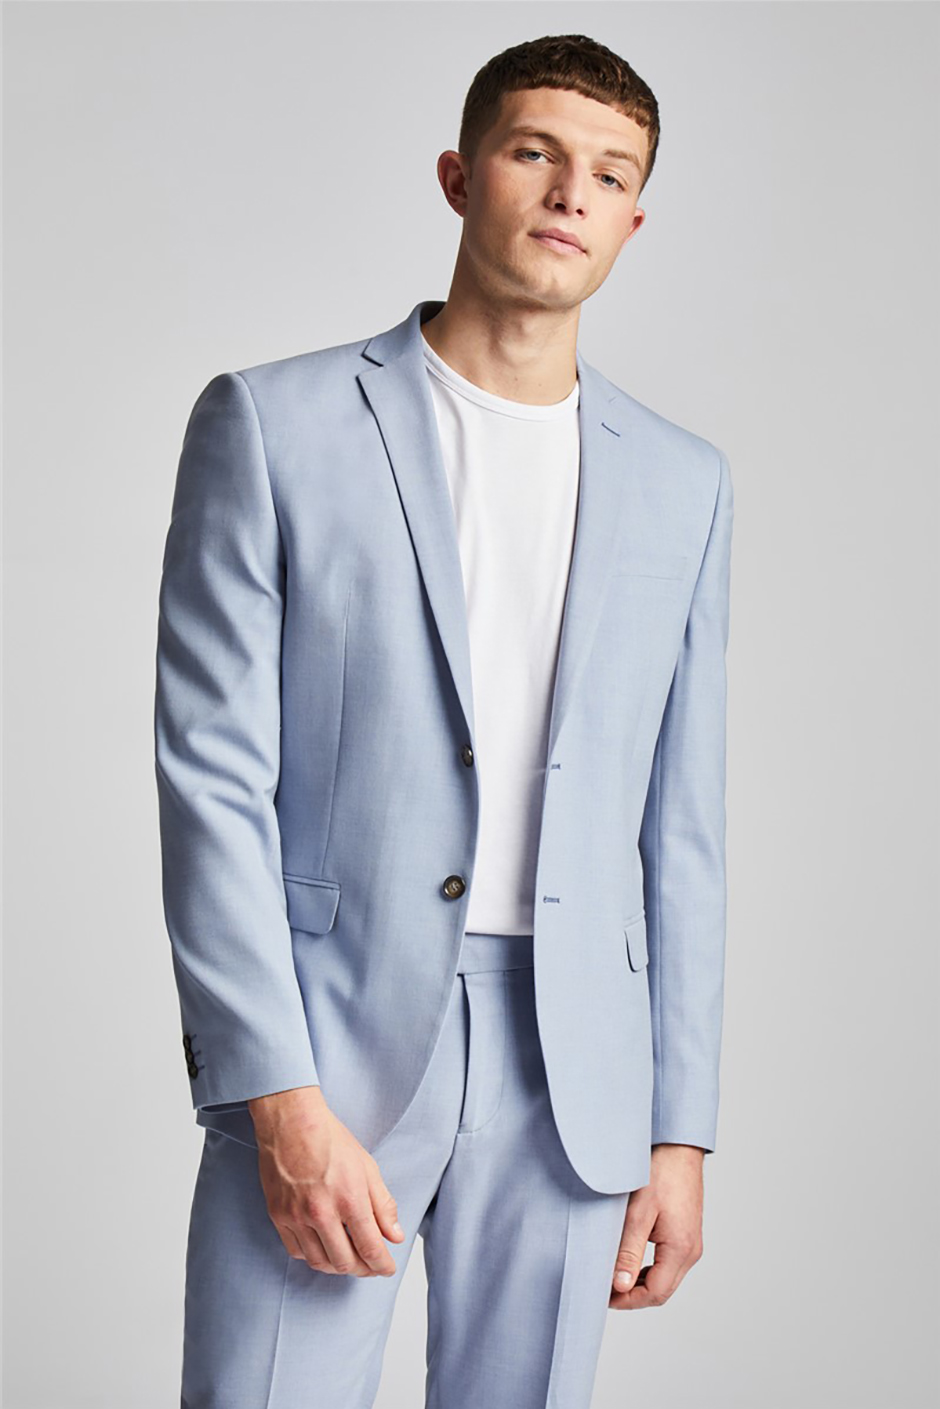 Pale cloud blue groomsmen suit for summer weddings from Suit Direct